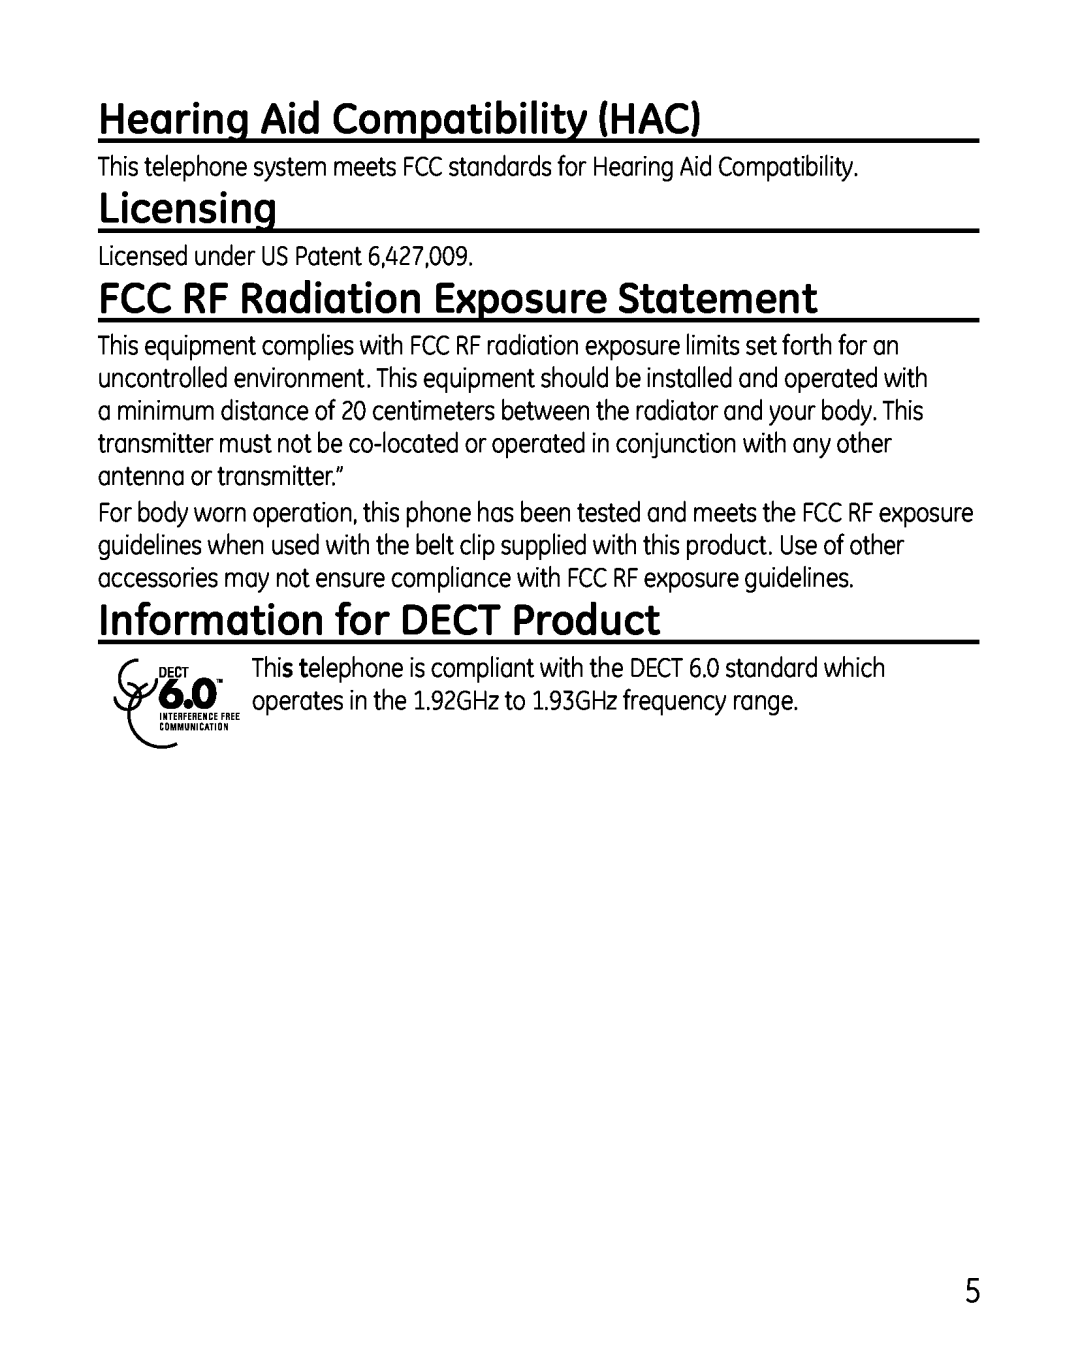 GE 28821 Series, 881, 28821xx4, 28821xx3, 28801 Hearing Aid Compatibility HAC, Licensing, FCC RF Radiation Exposure Statement 